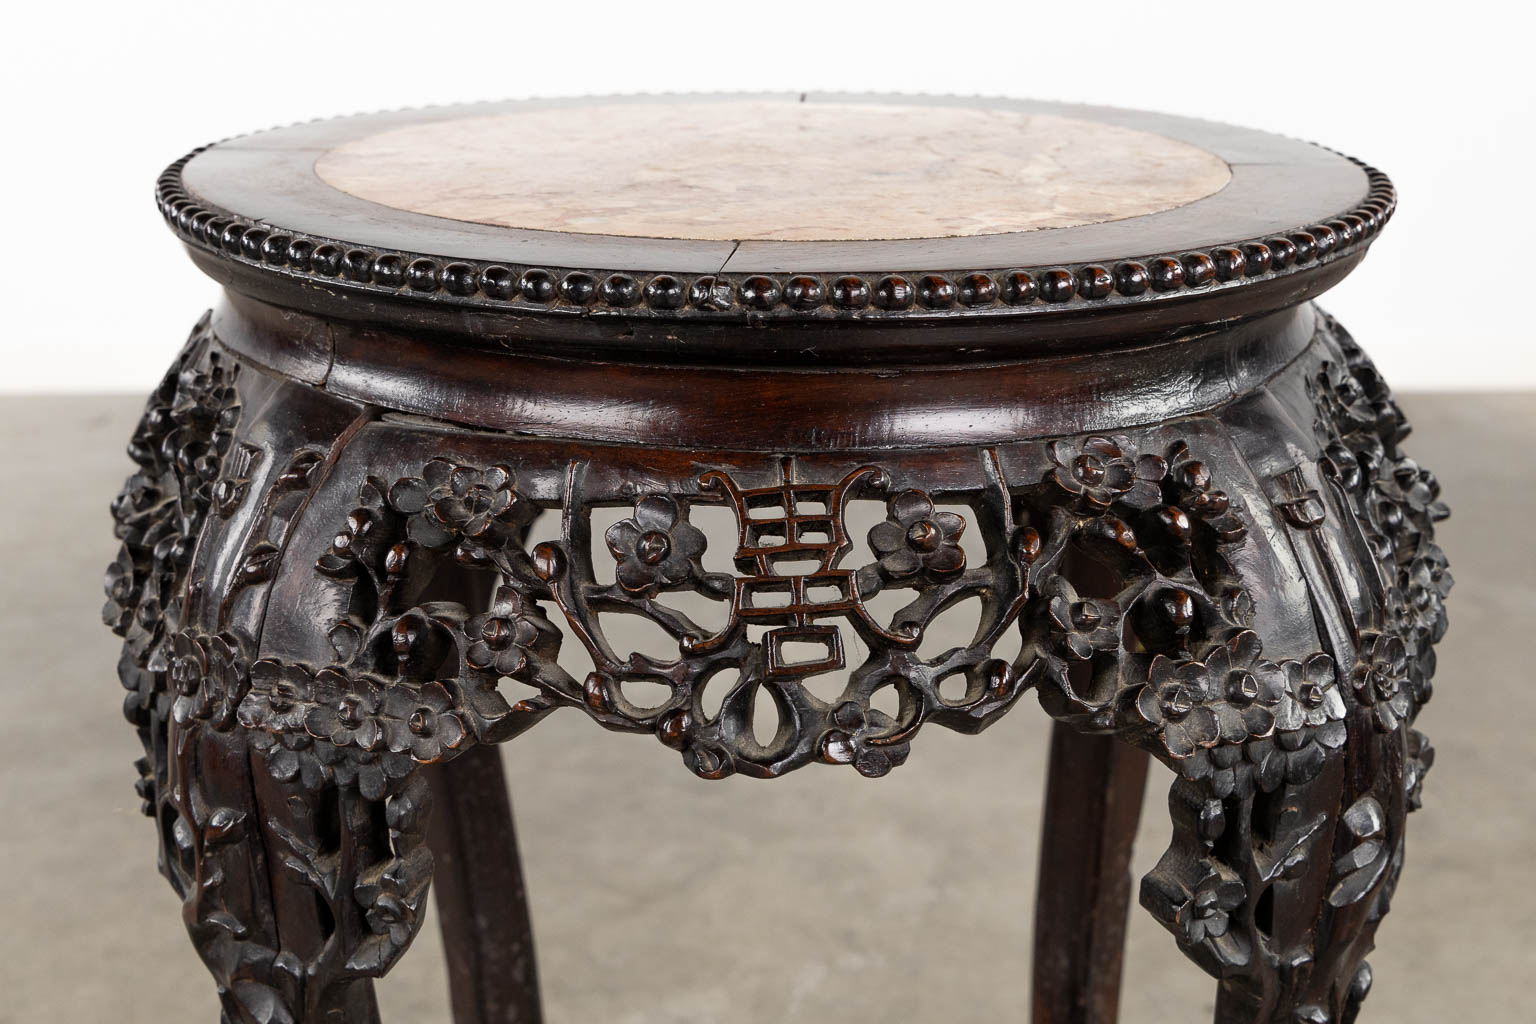 A richly sculptured Chinese hardwood side table or pedestal with a marble. (H:71 x D:53 cm) - Image 9 of 12